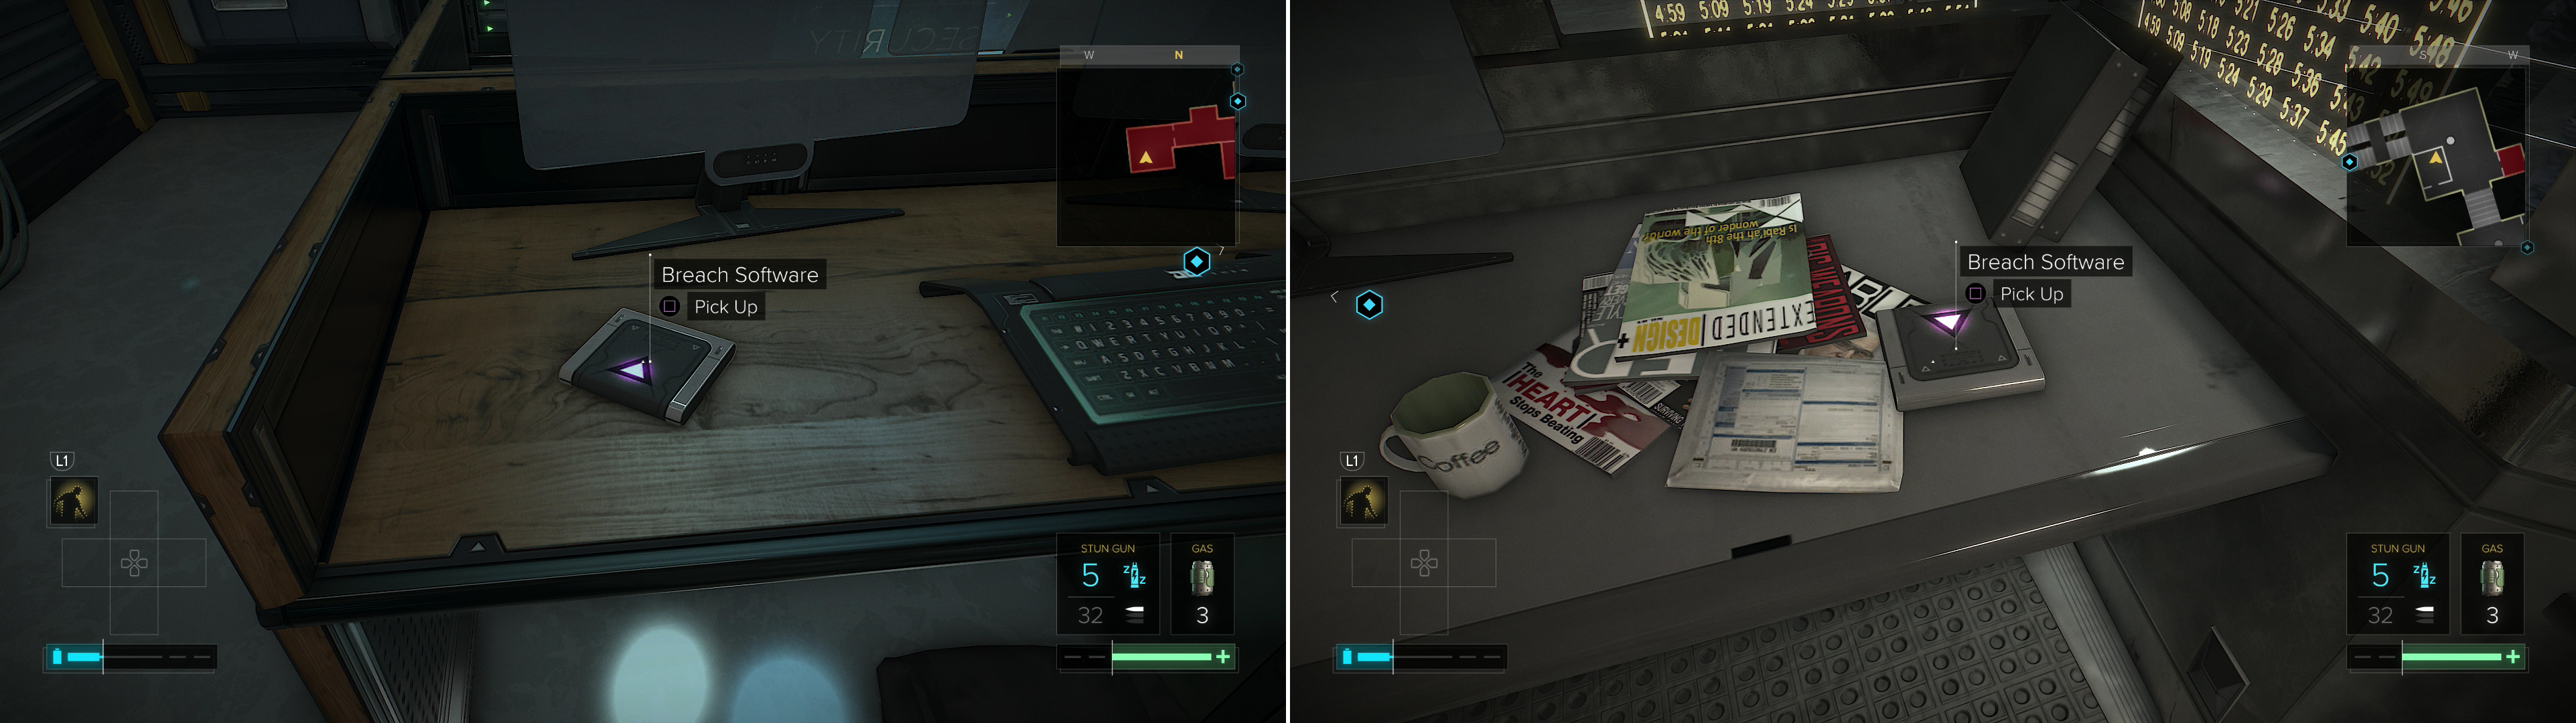 You can find Breach Software #30 in the Capek Station (left), while Breach Software #19 await you in the ticket booth of the Palisade Station (right).